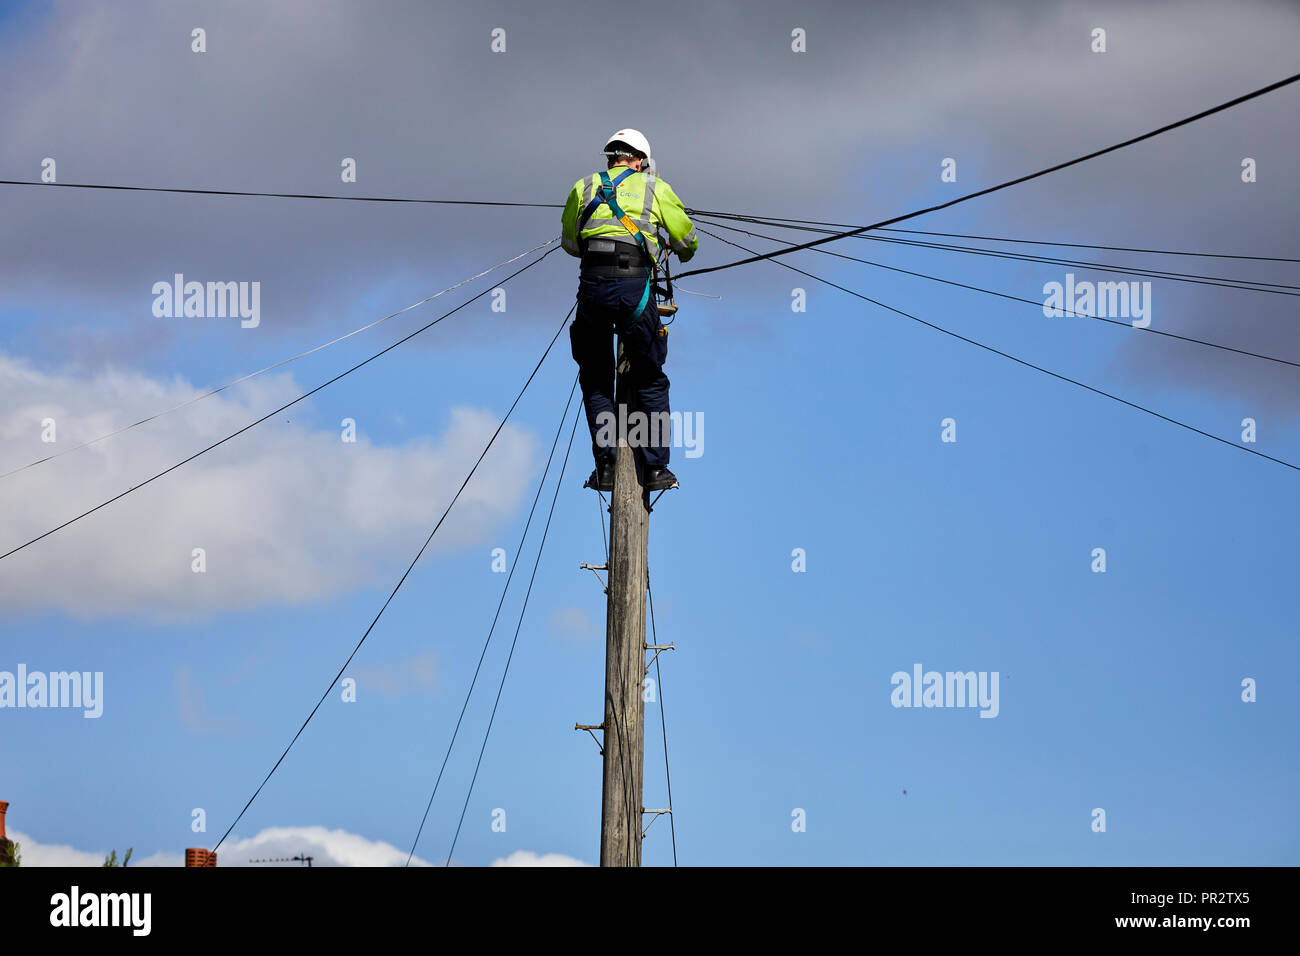 Contractors telecome Engineer from Kelly Communications climbing a telephone pole to fix a telephone line working subcontractor for BT Openreach in Ma Stock Photo